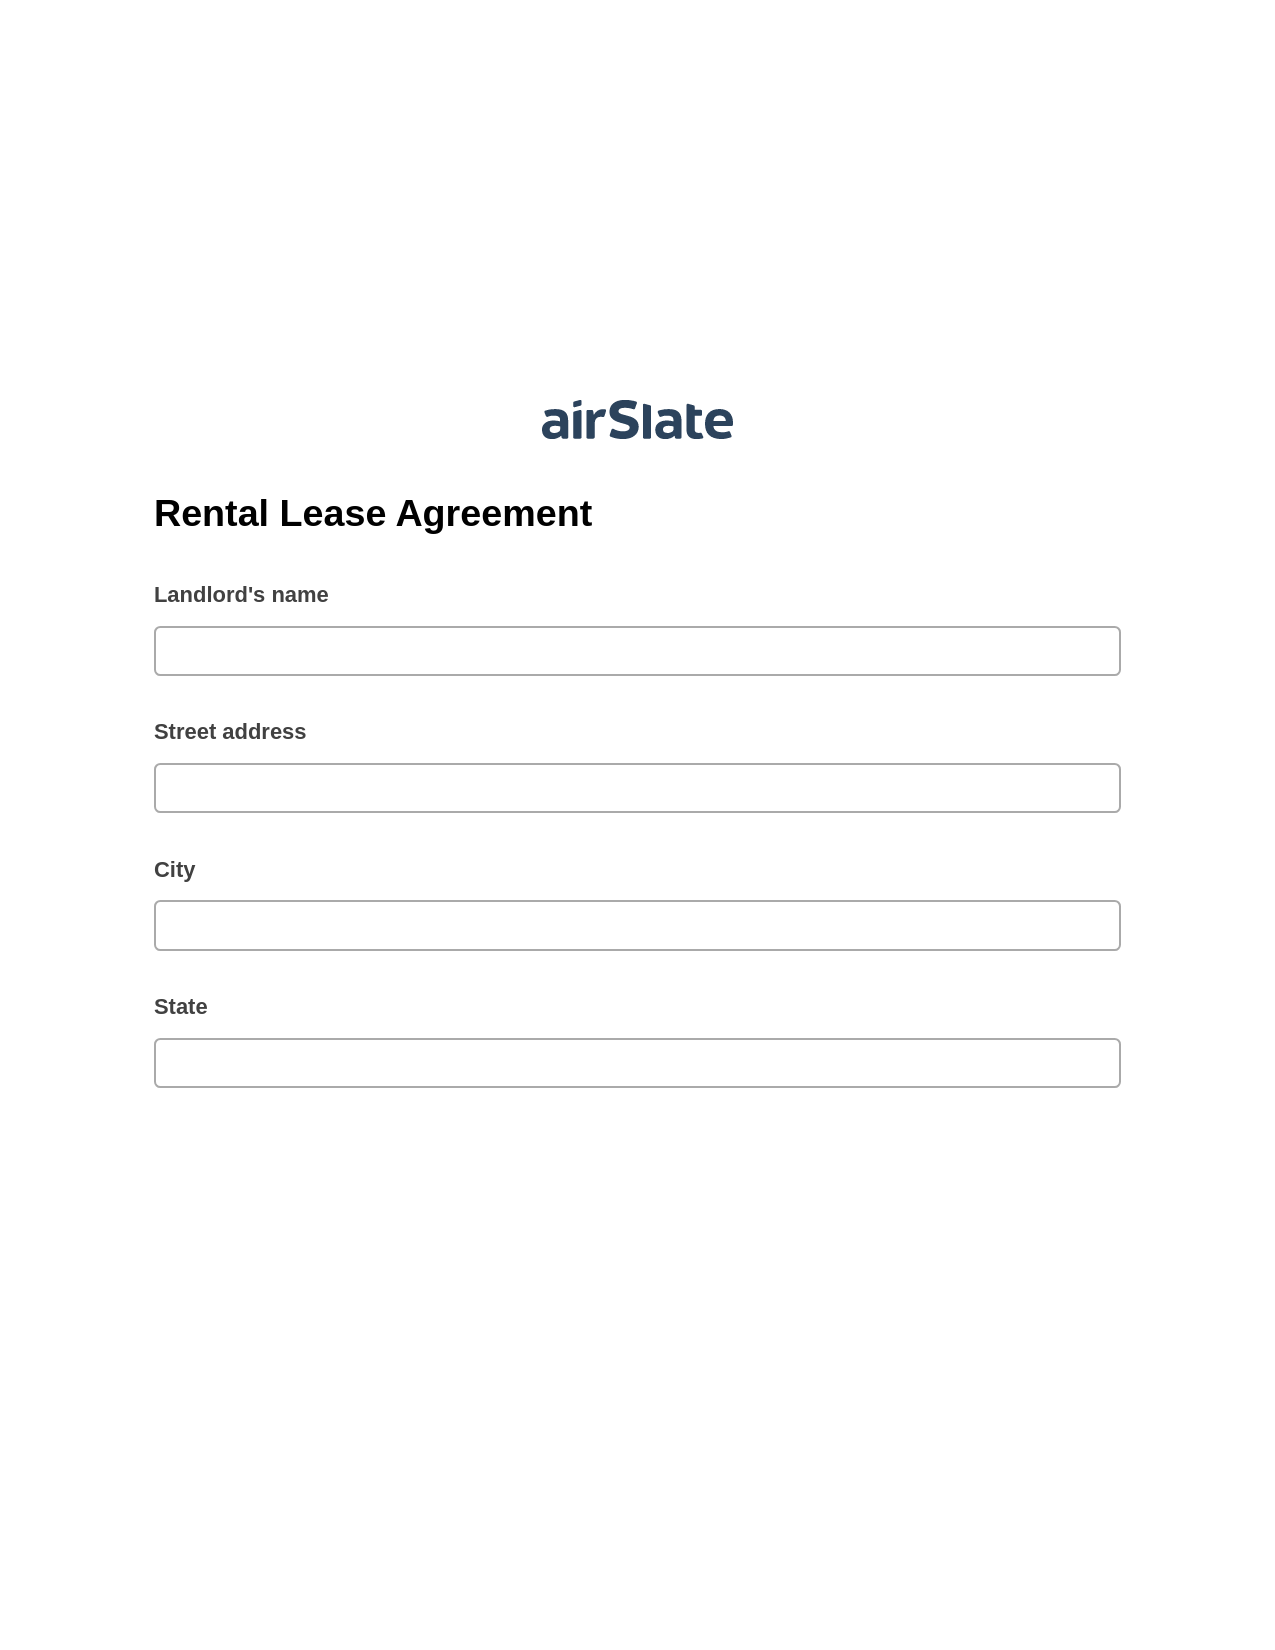 Rental Lease Agreement Pre-fill Document Bot, Google Cloud Print Bot, Archive to SharePoint Folder Bot